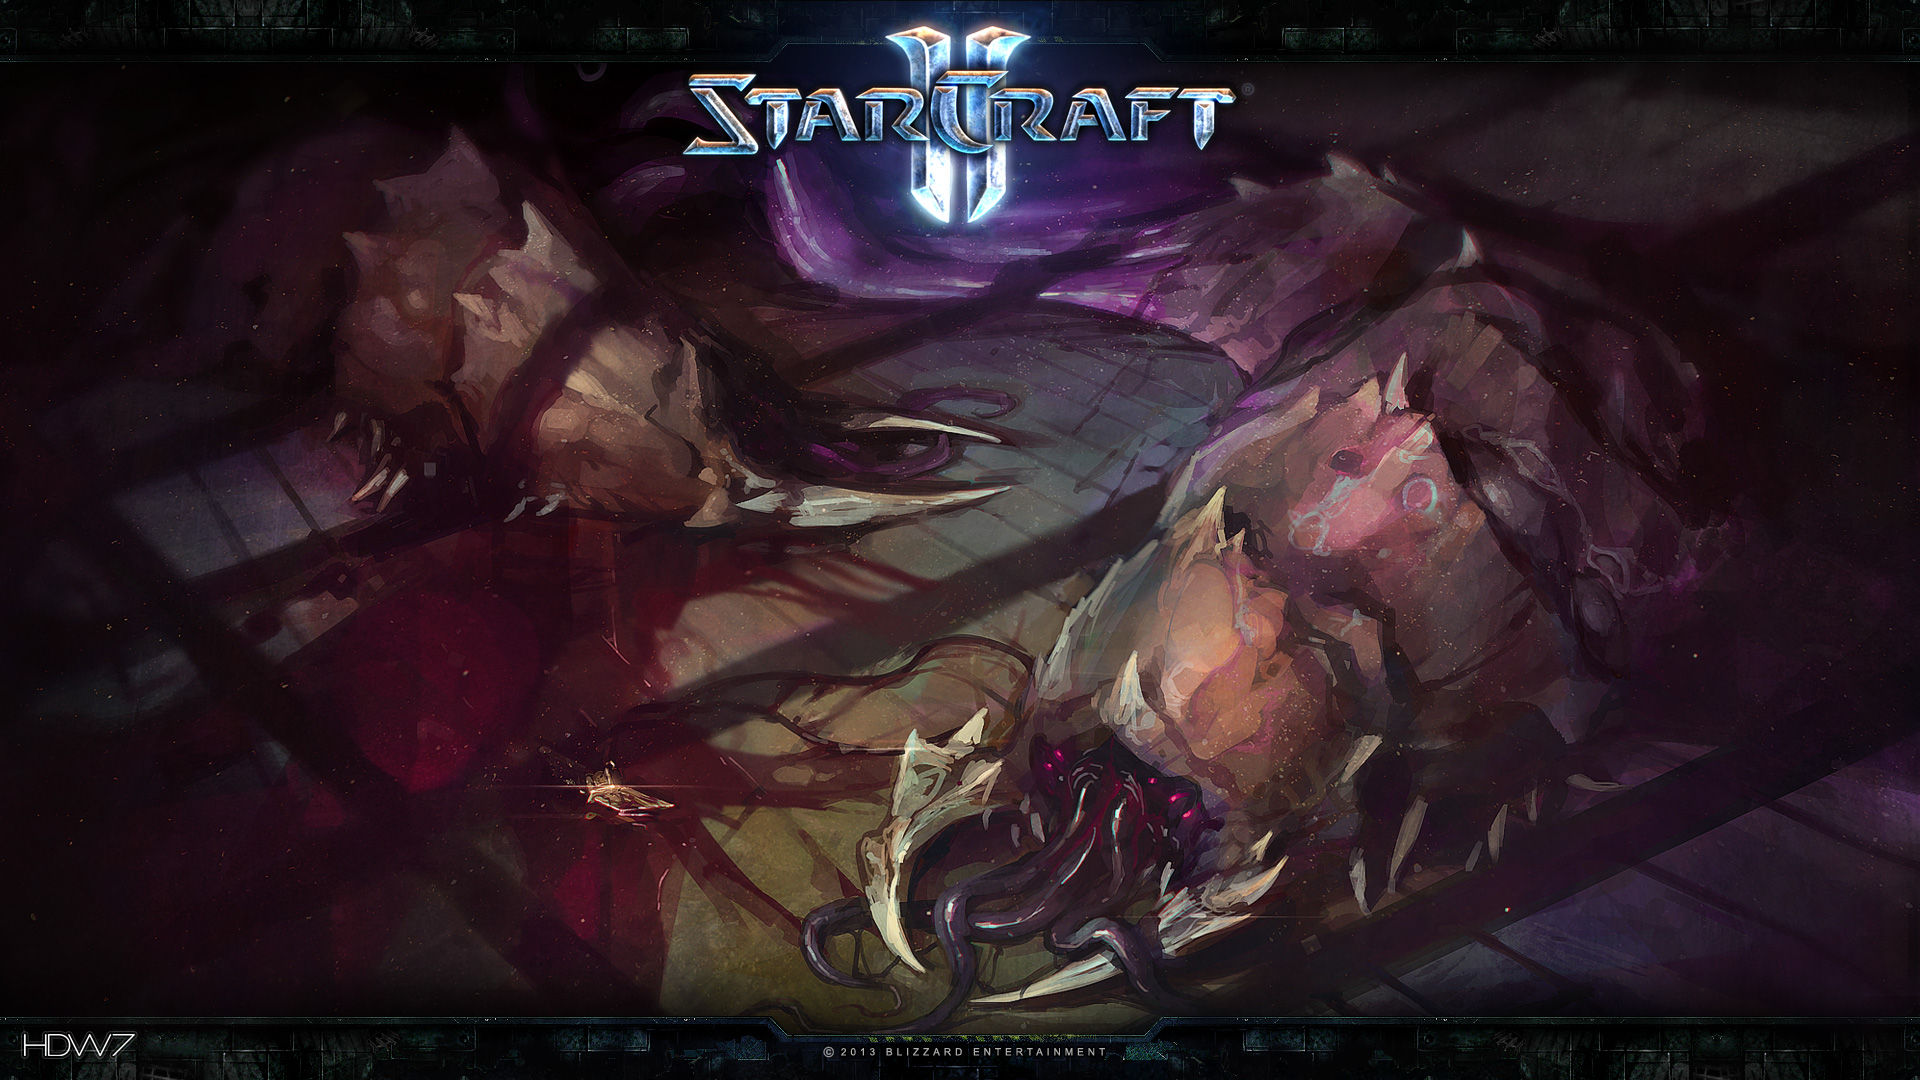 Starcraft 2 Heart Of The Swarm In The Blood Widescreen - Starcraft 2 Wing Of Liberty - HD Wallpaper 